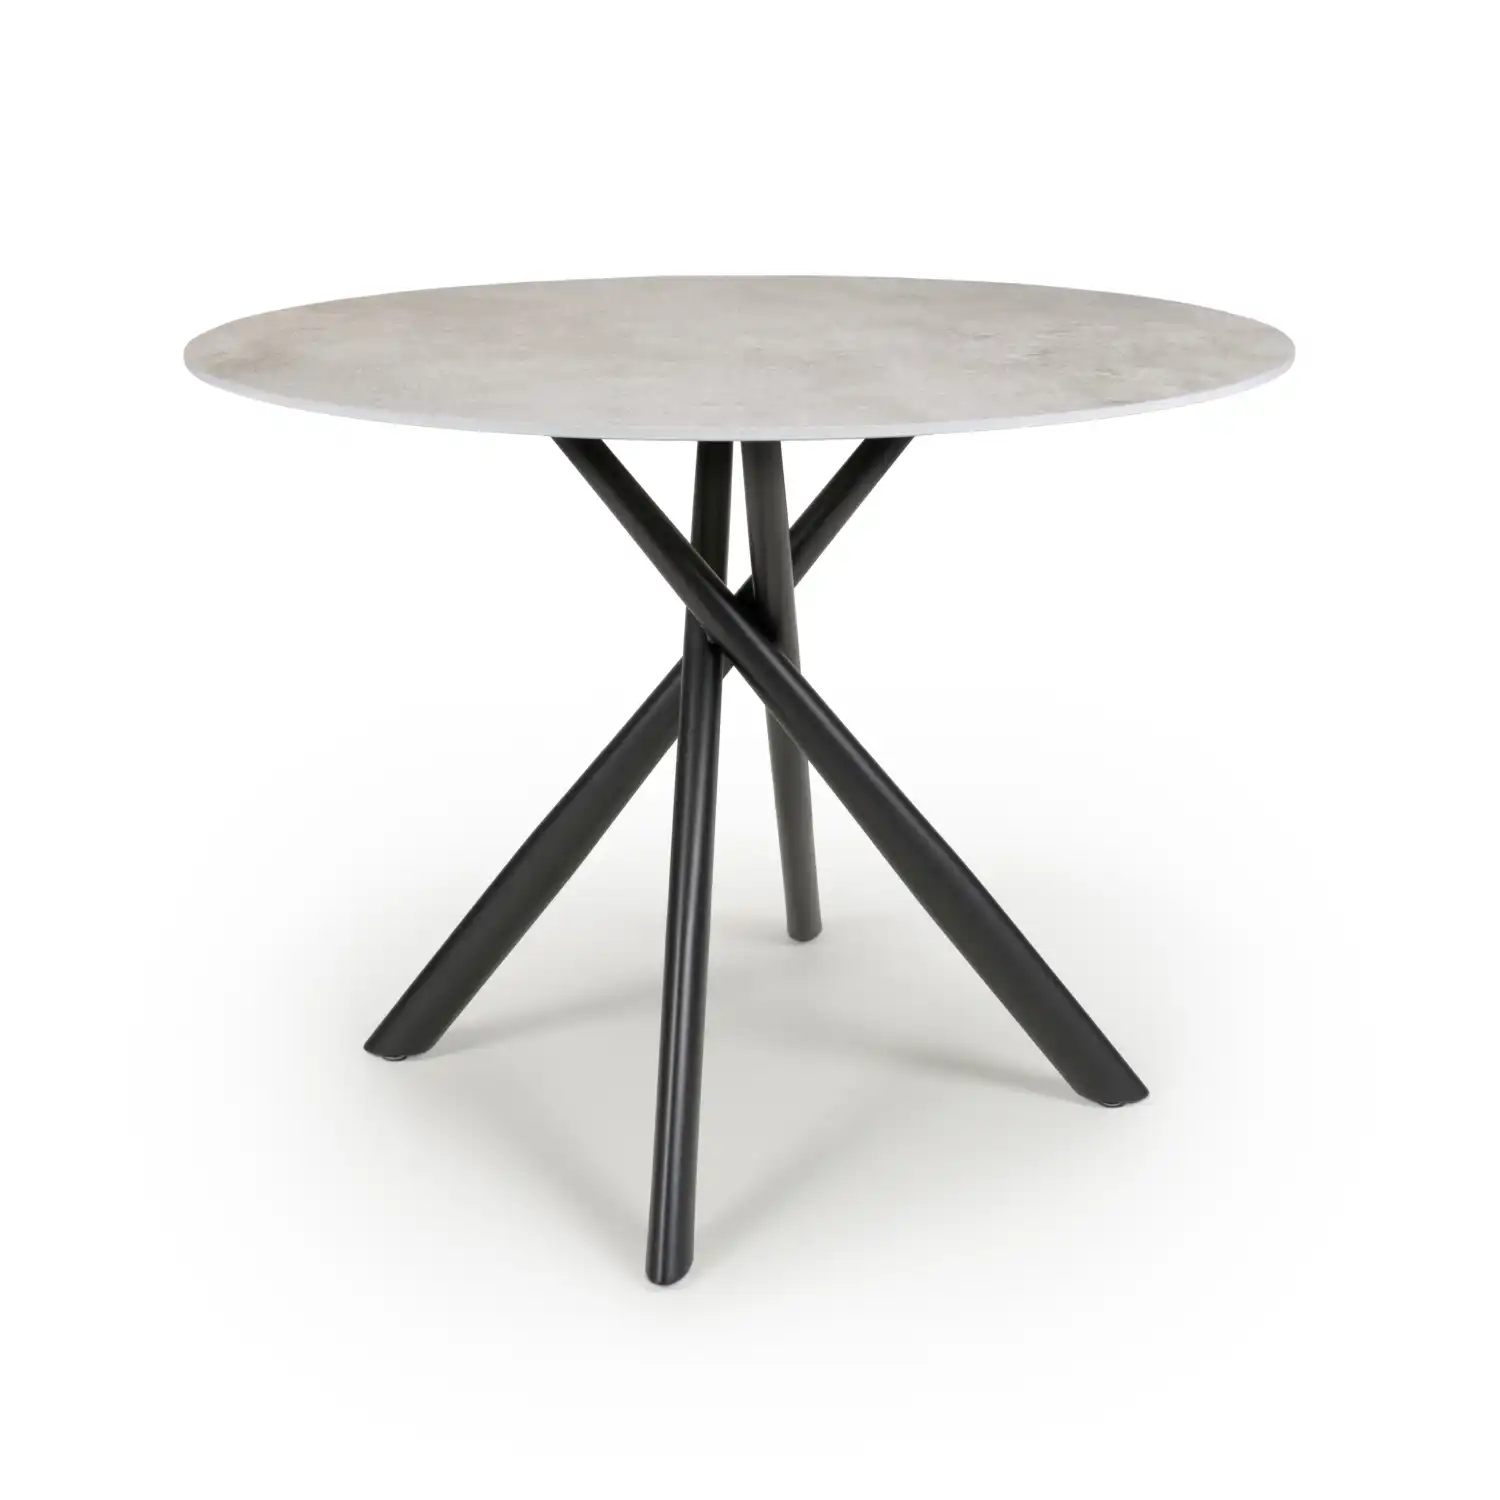 Grey Marble Effect Glass Round Dining Table Black Legs